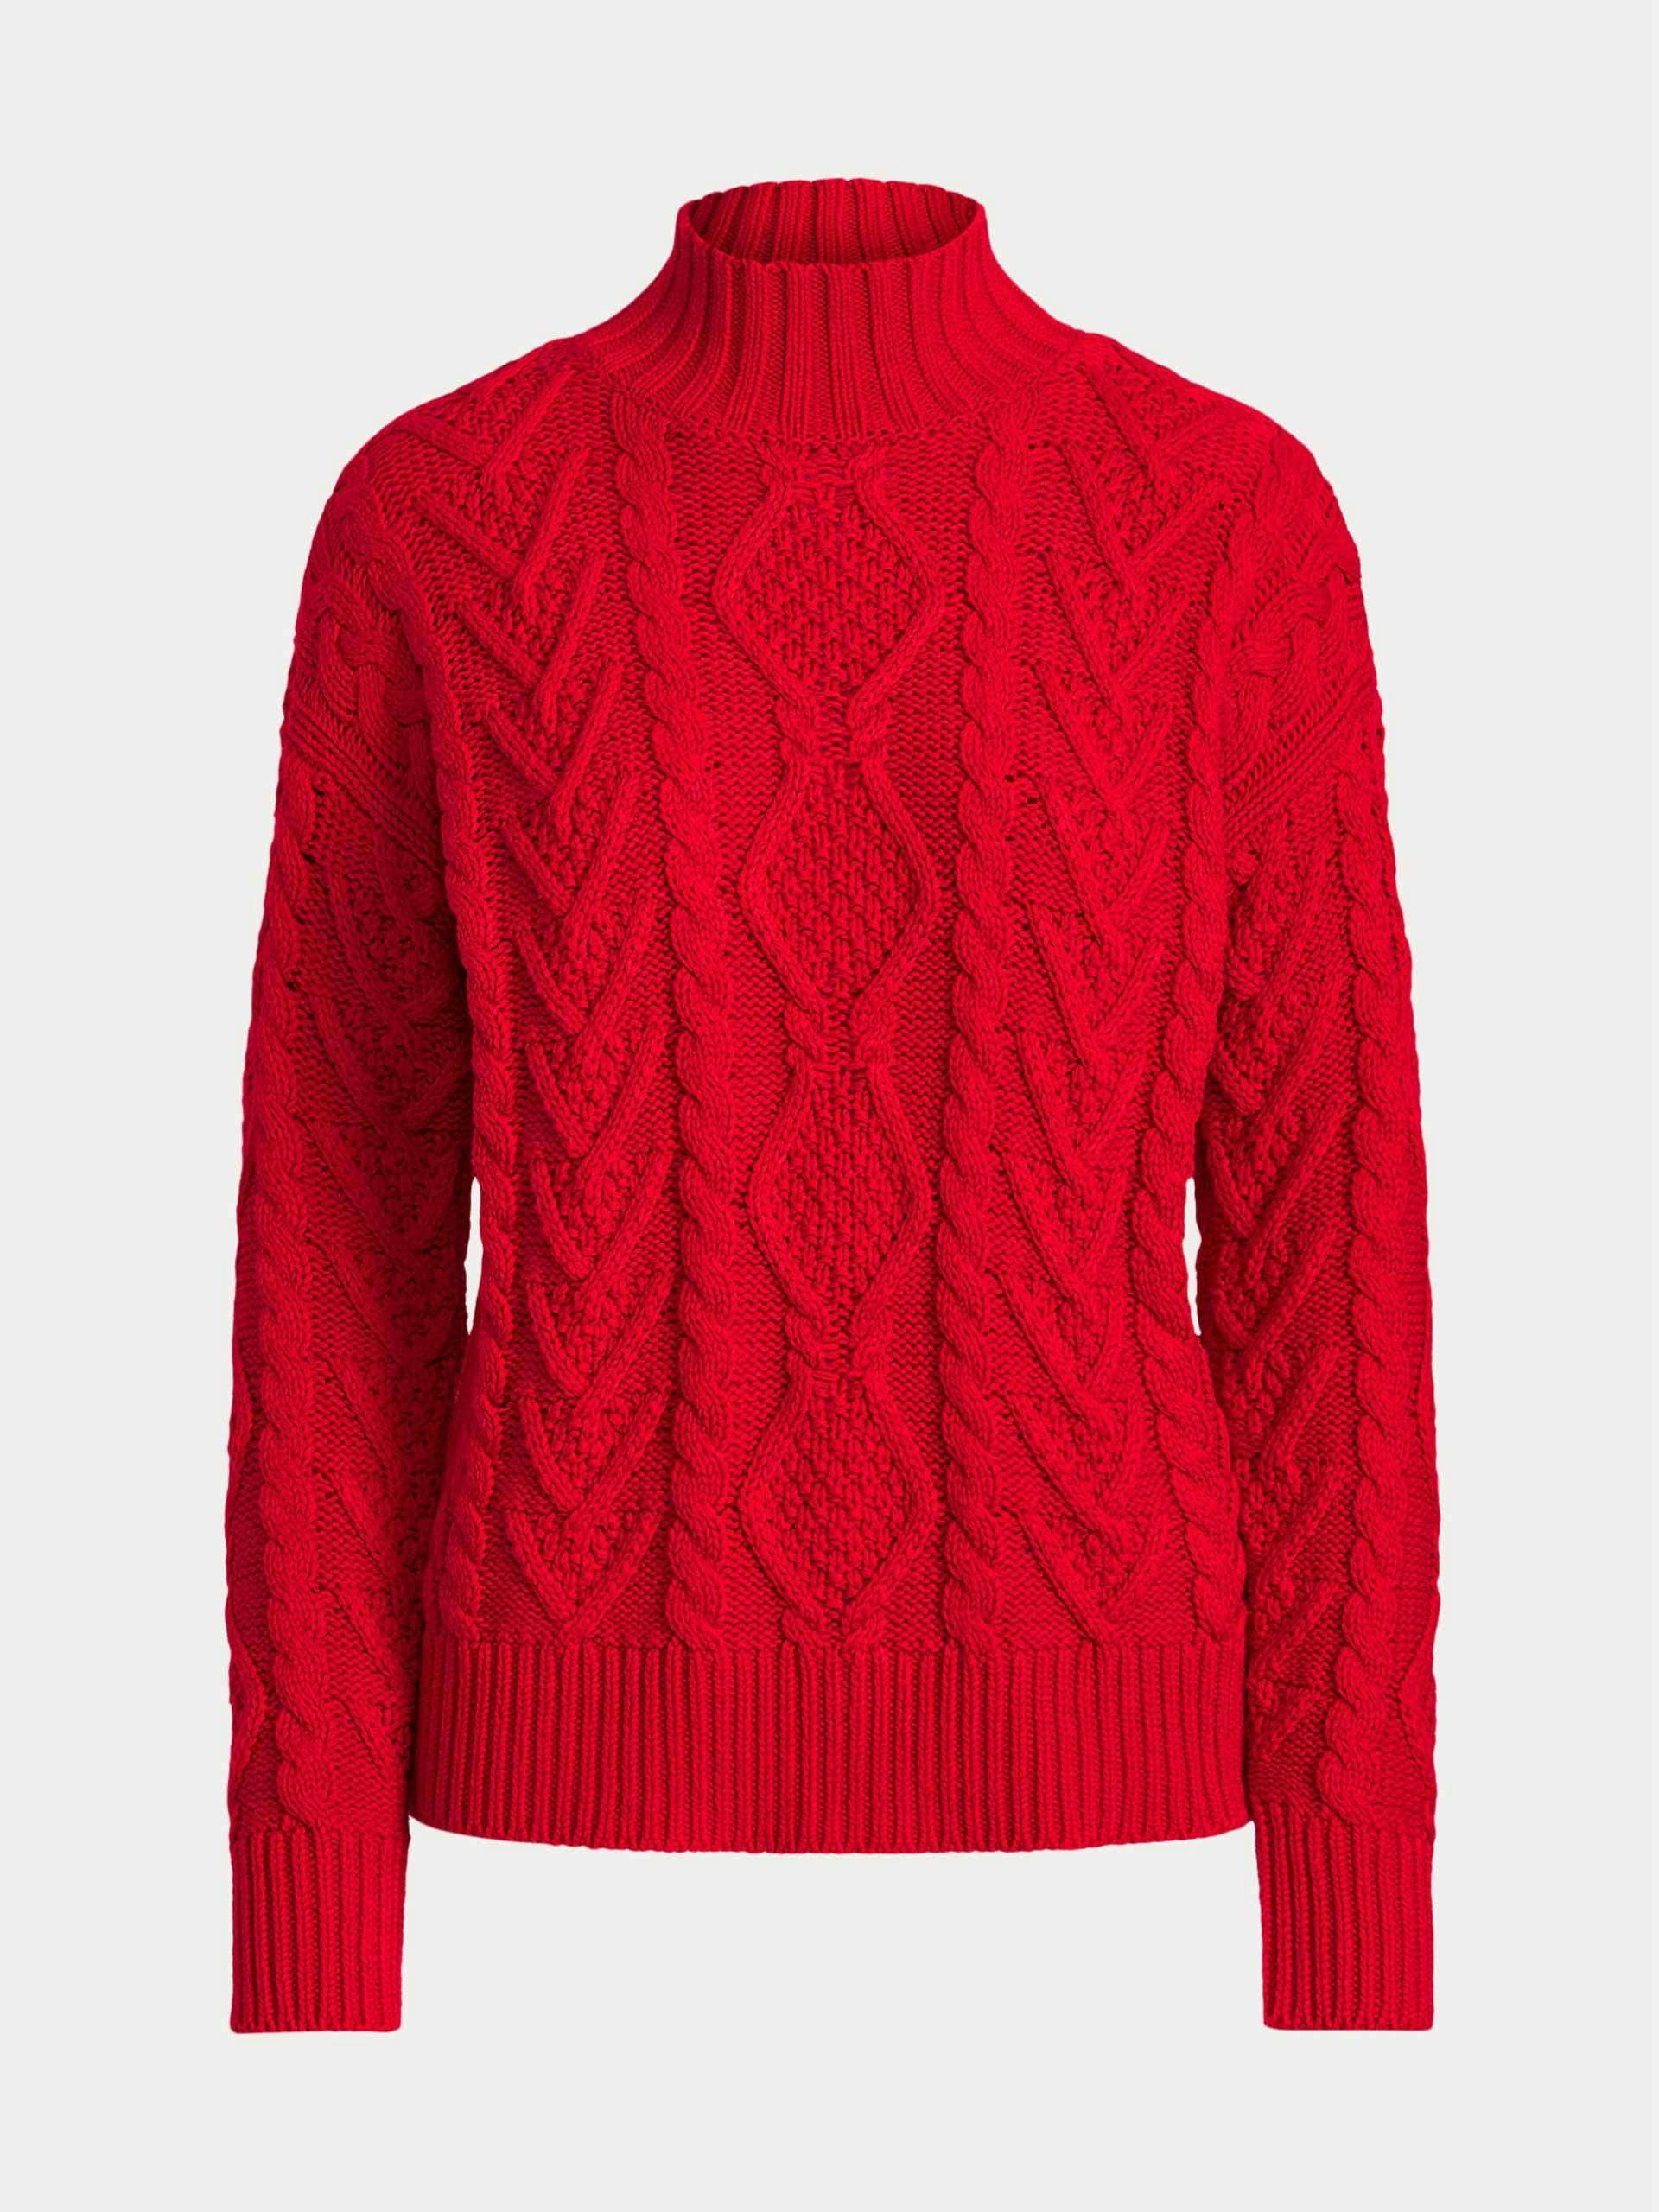 Red cable knit mock neck jumper